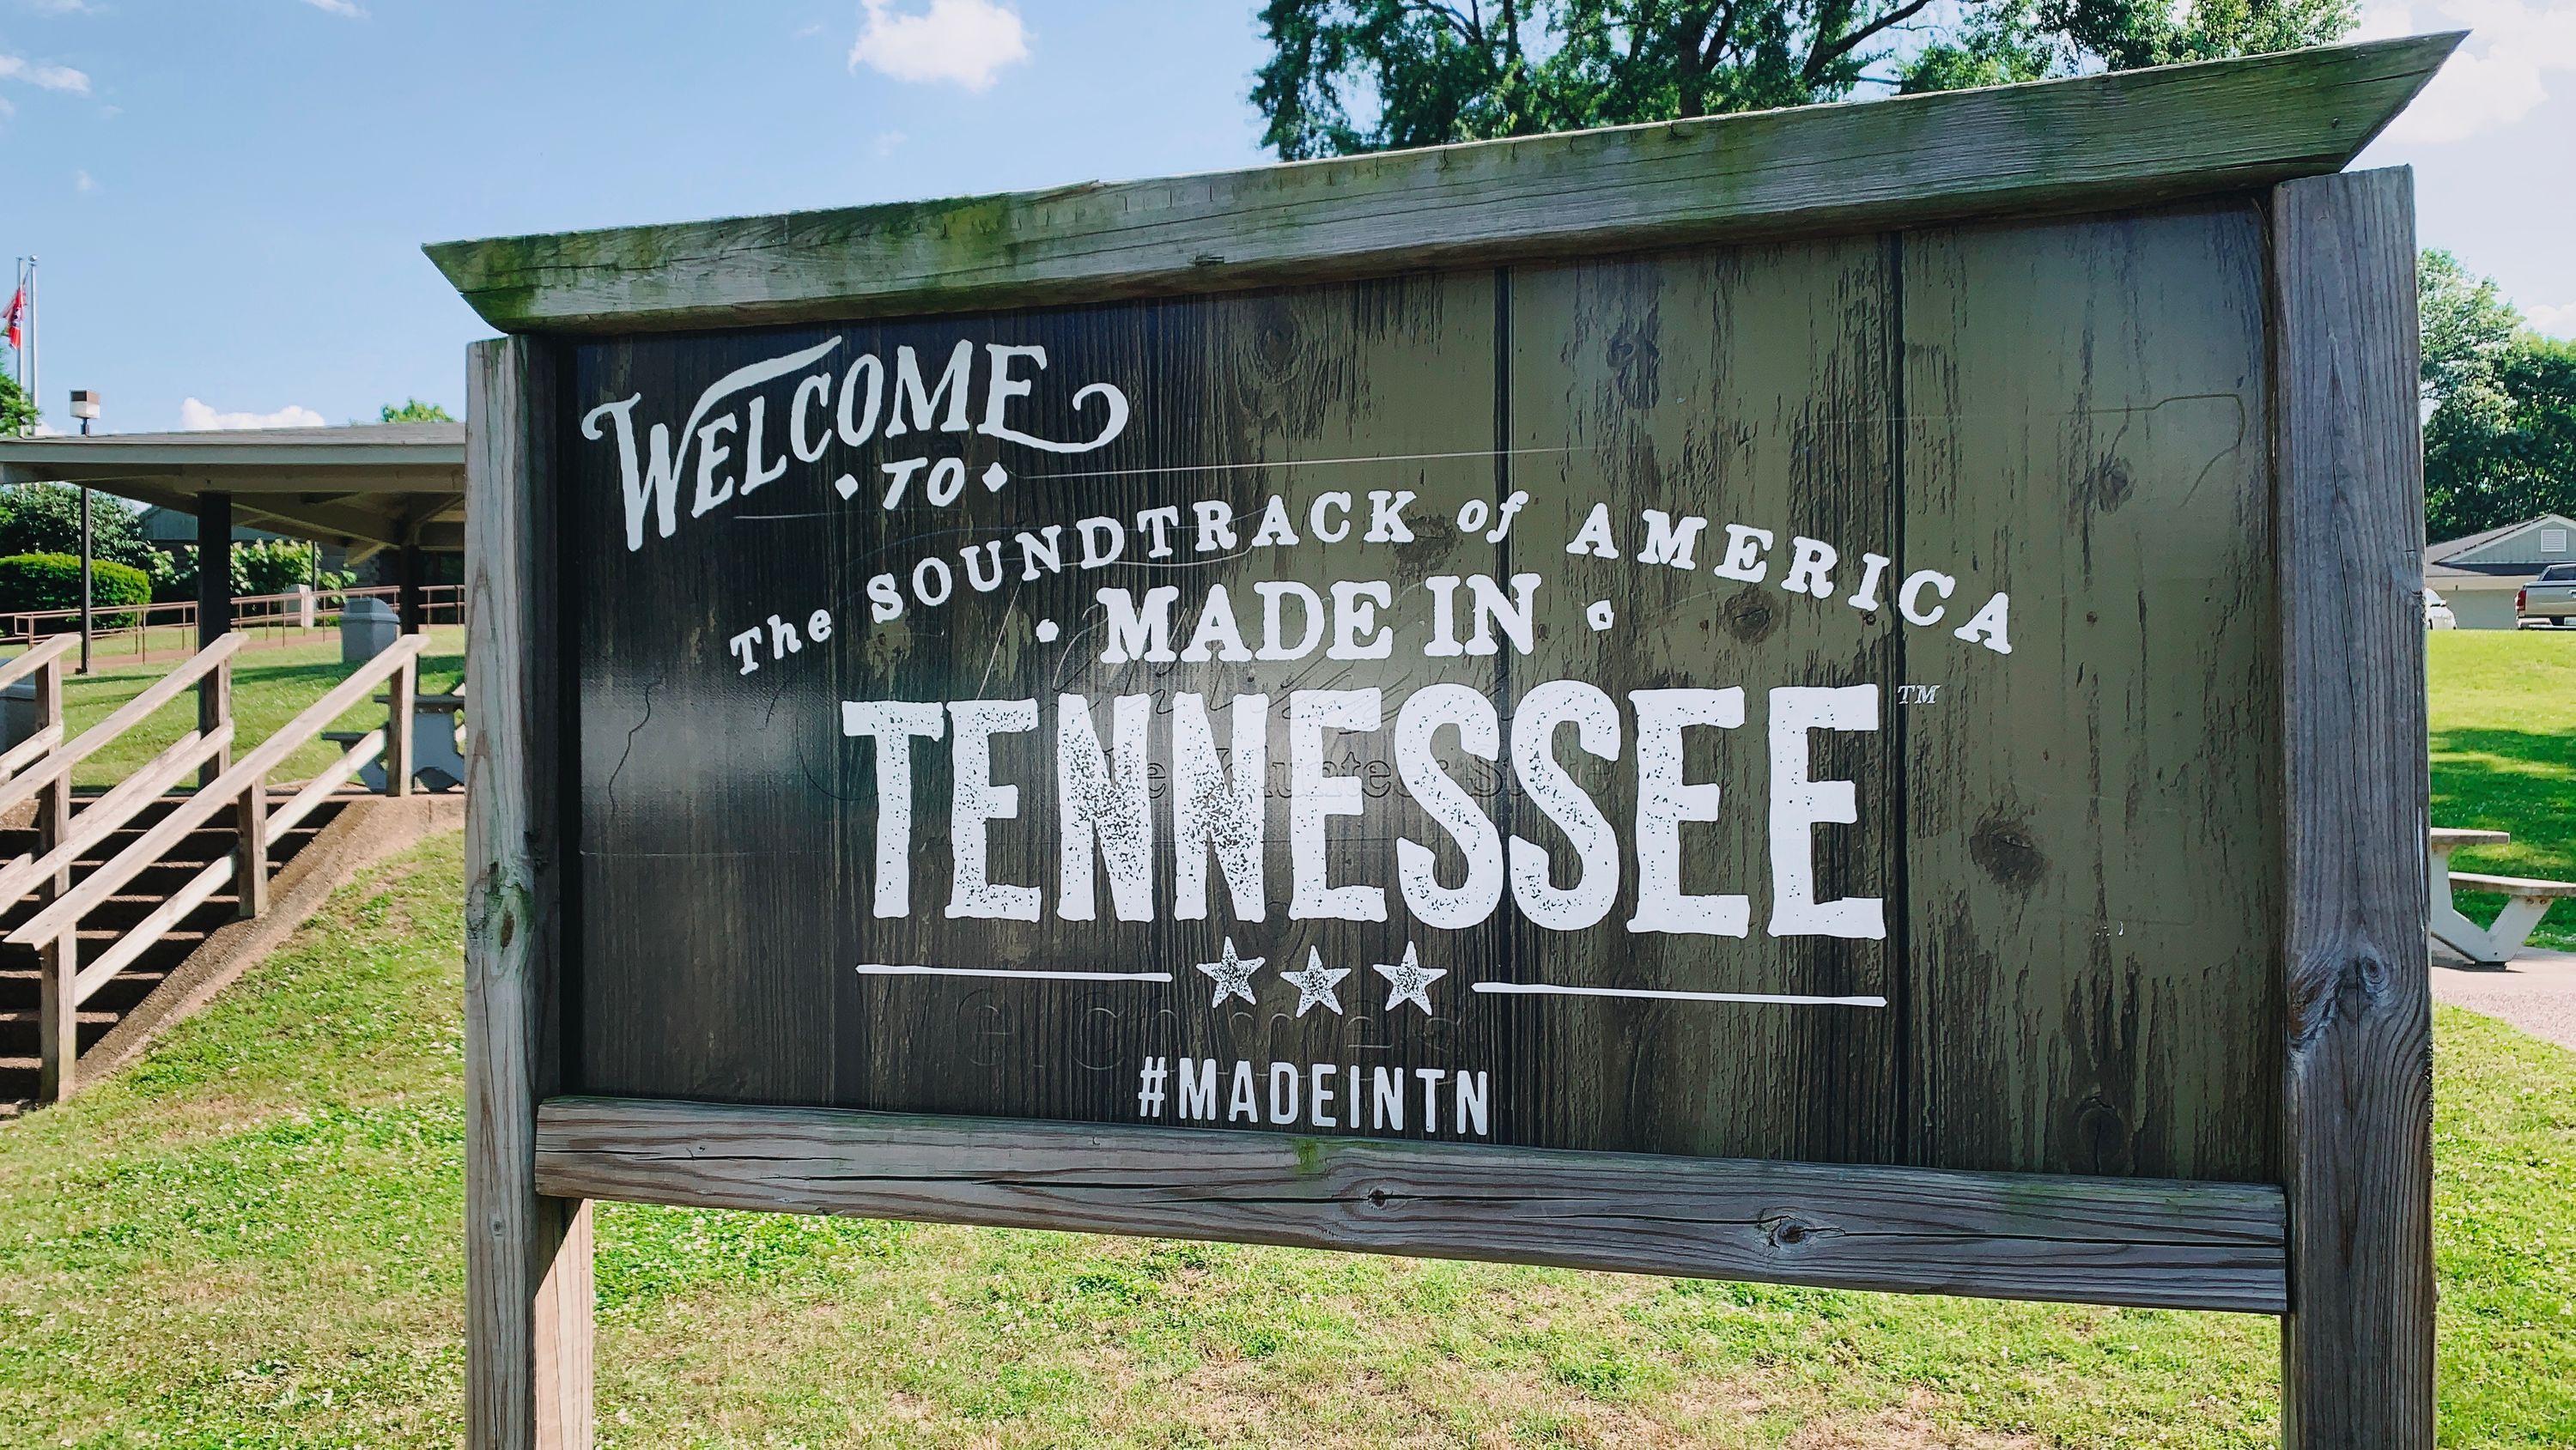 A Tennessee rest area sign advertising Tennessee as the birthplace of the Soundtrack to America